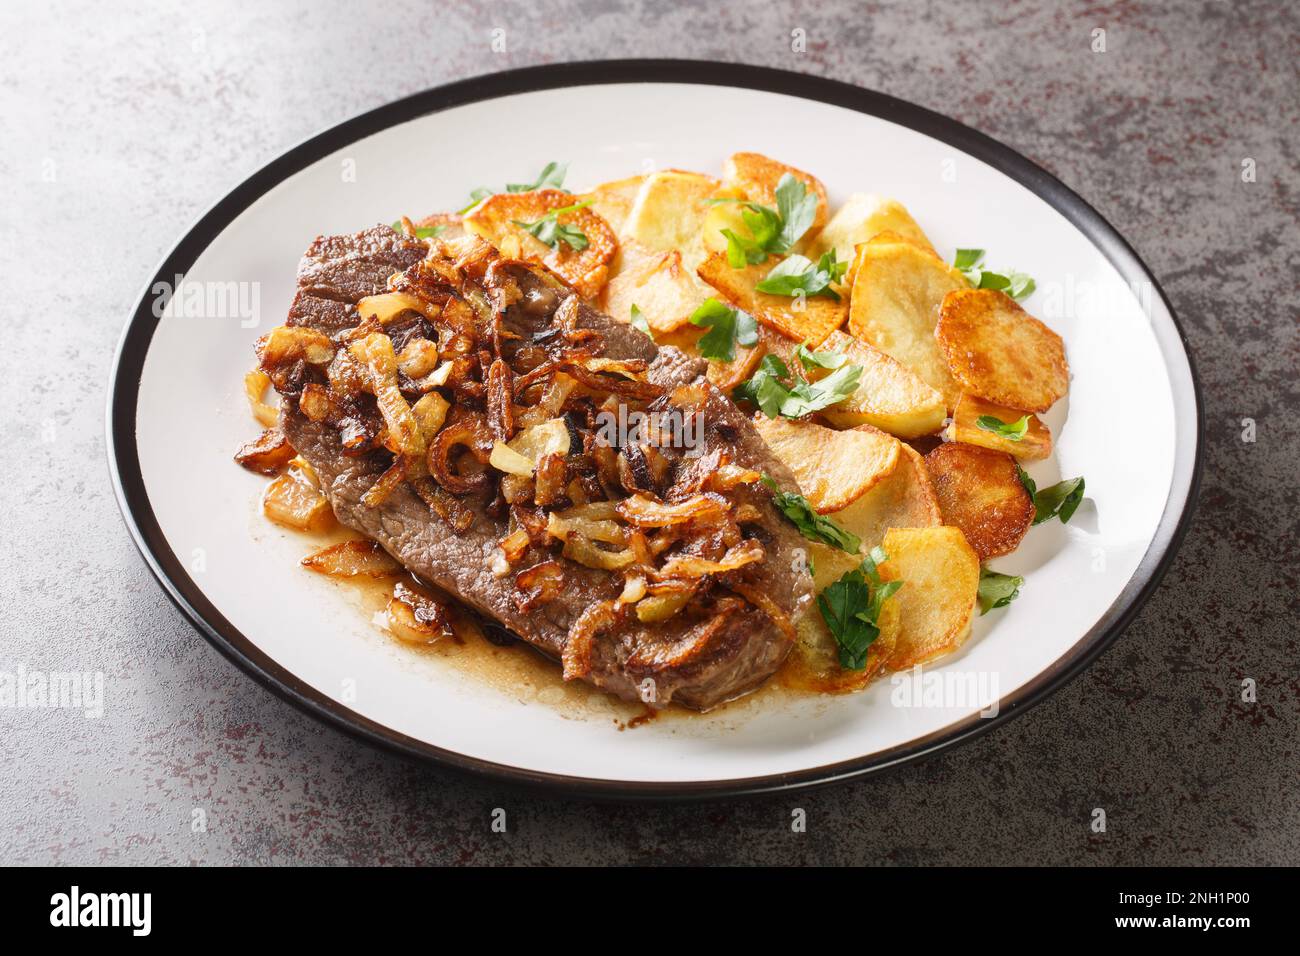 Original and Authentic German Zwiebelrostbraten with onion gravy and fried potatoes Bratkartoffeln closeup on the plate on the table. Horizontal Stock Photo